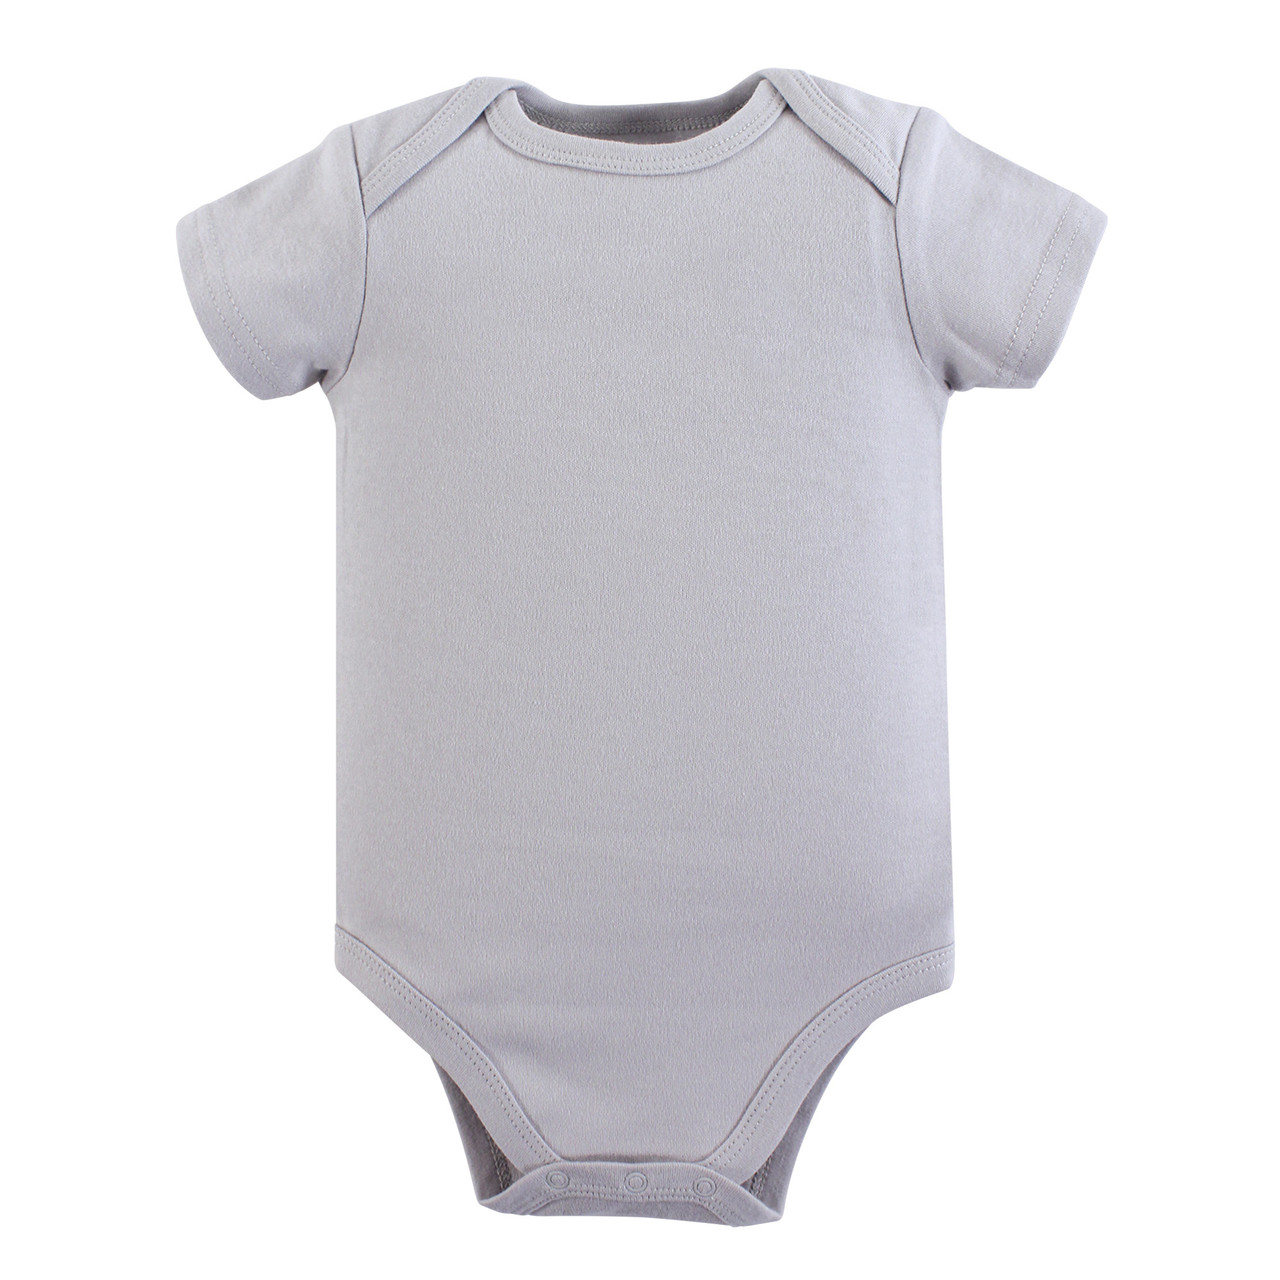 Luvable Friends Bodysuits, 1-Pack, Gray | Baby and Toddler Clothes ...